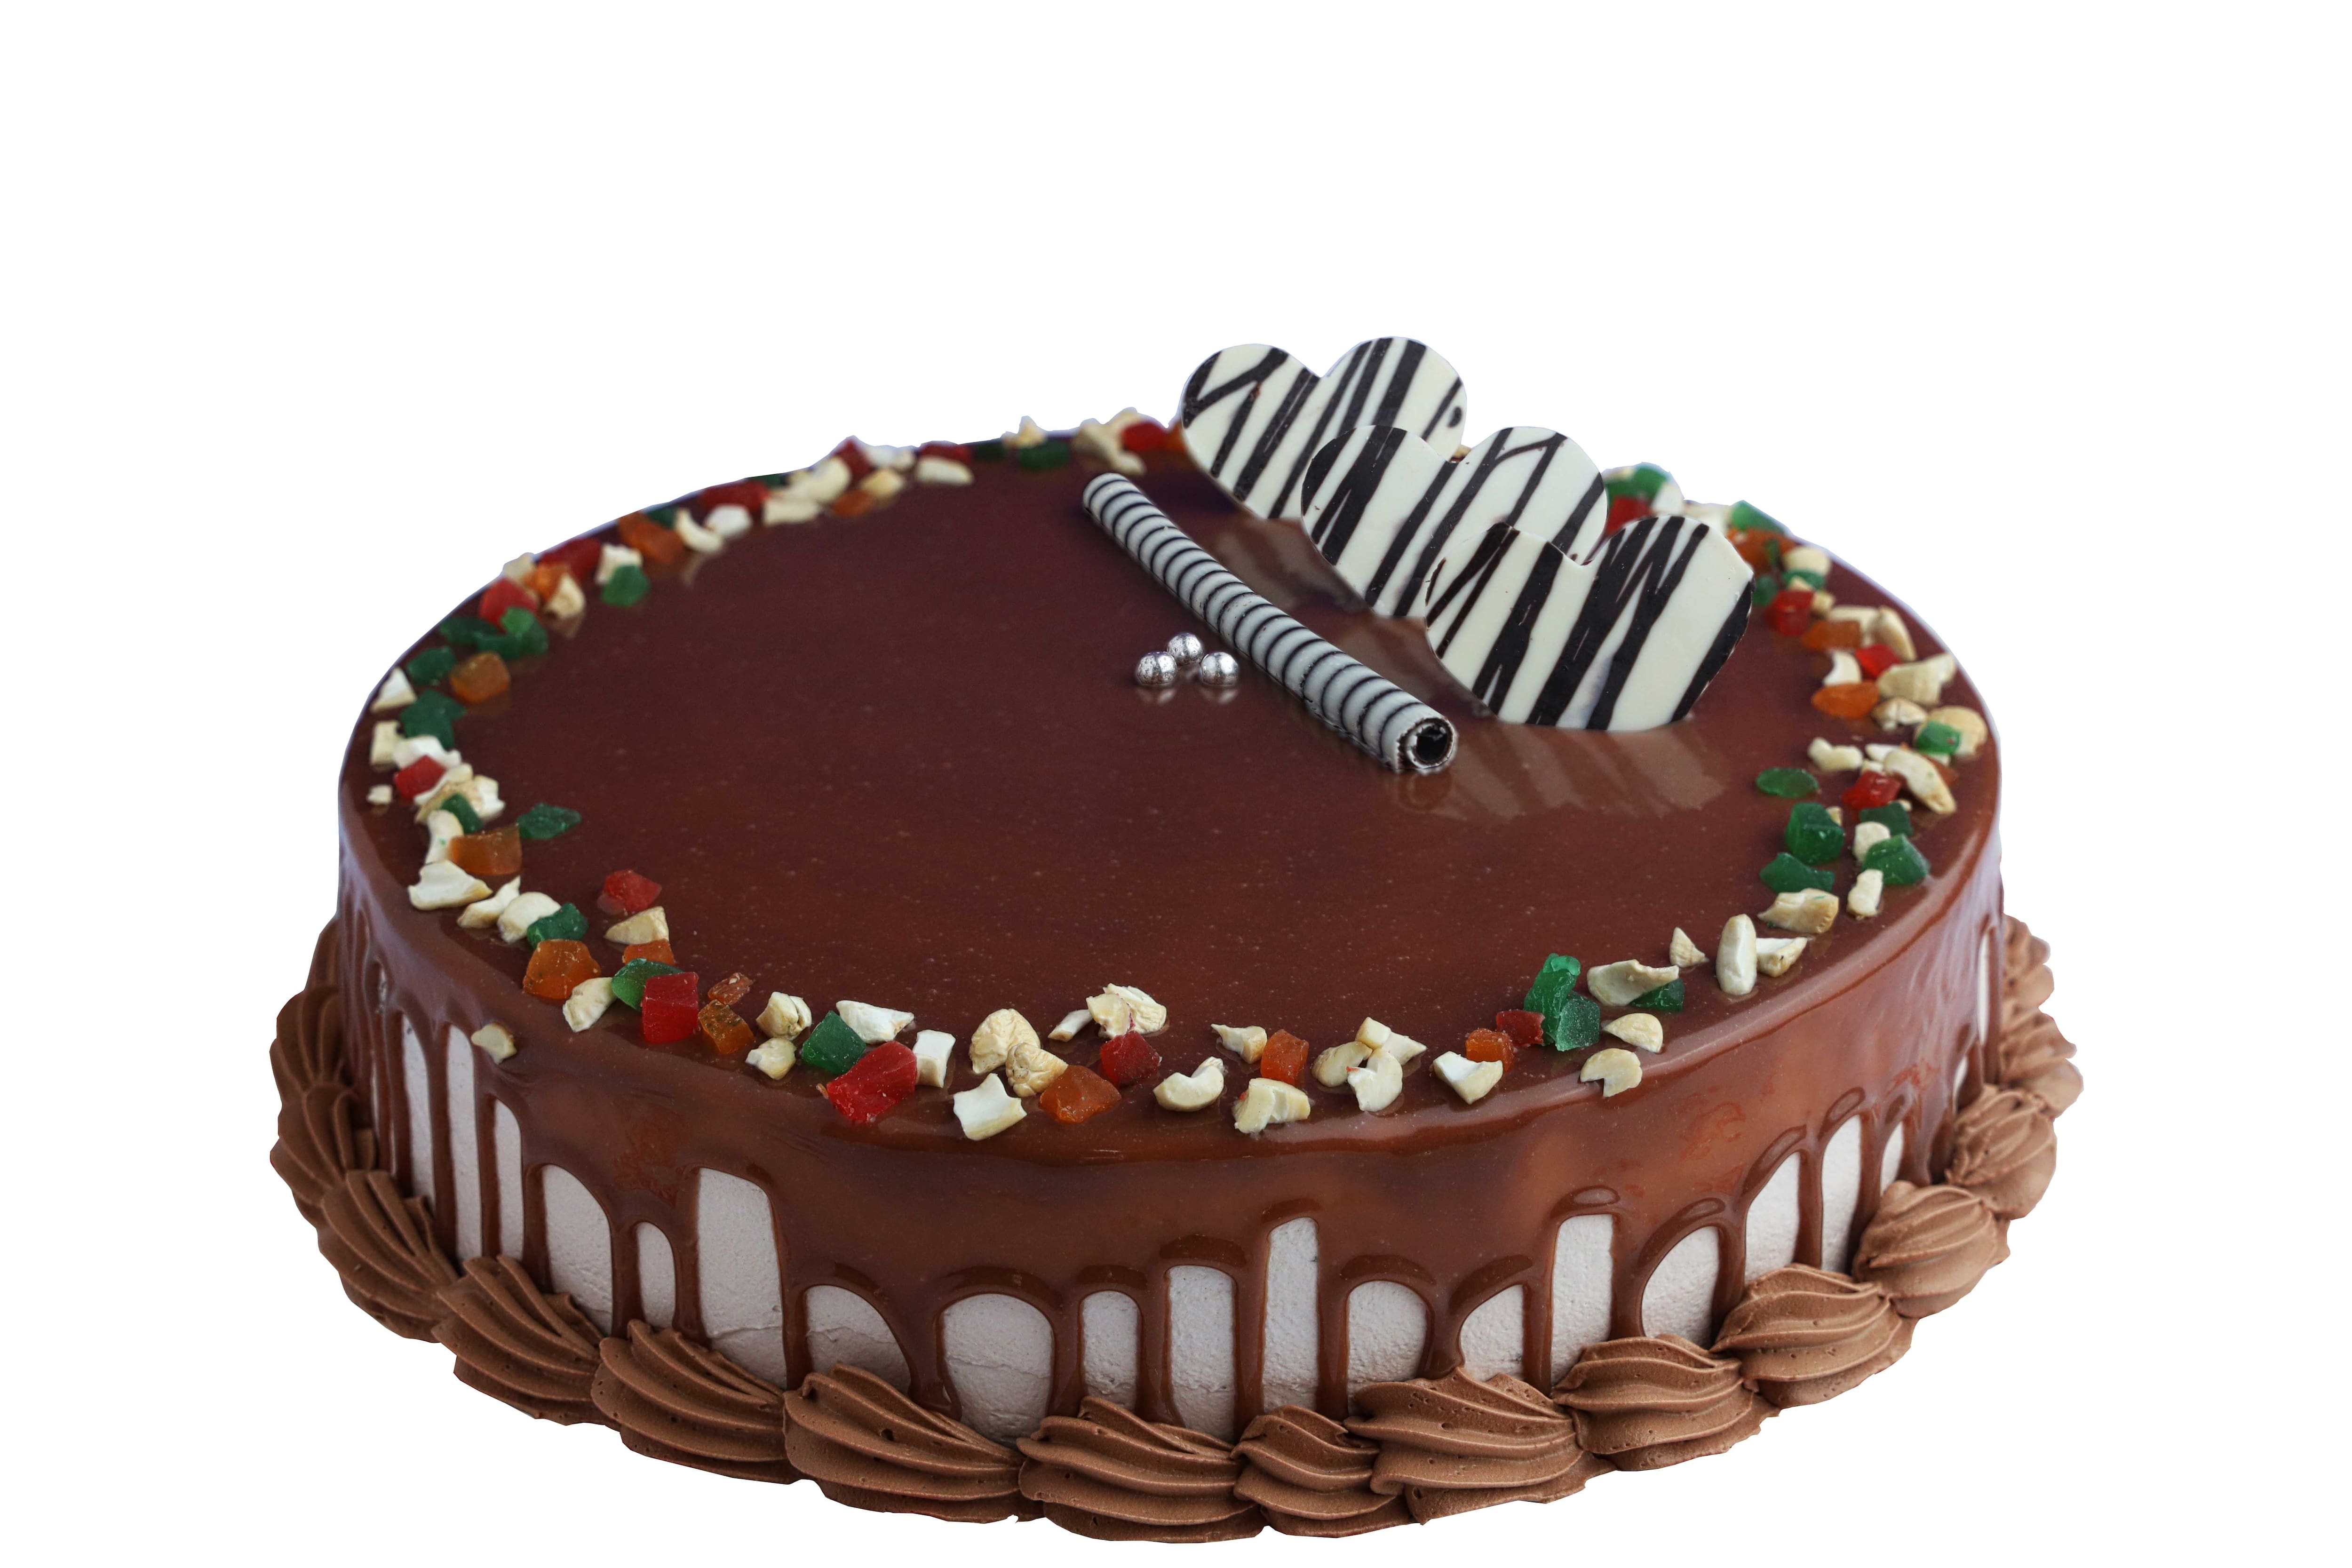 Find list of Fb Cakes in Potheri, Chengalpattu - Justdial